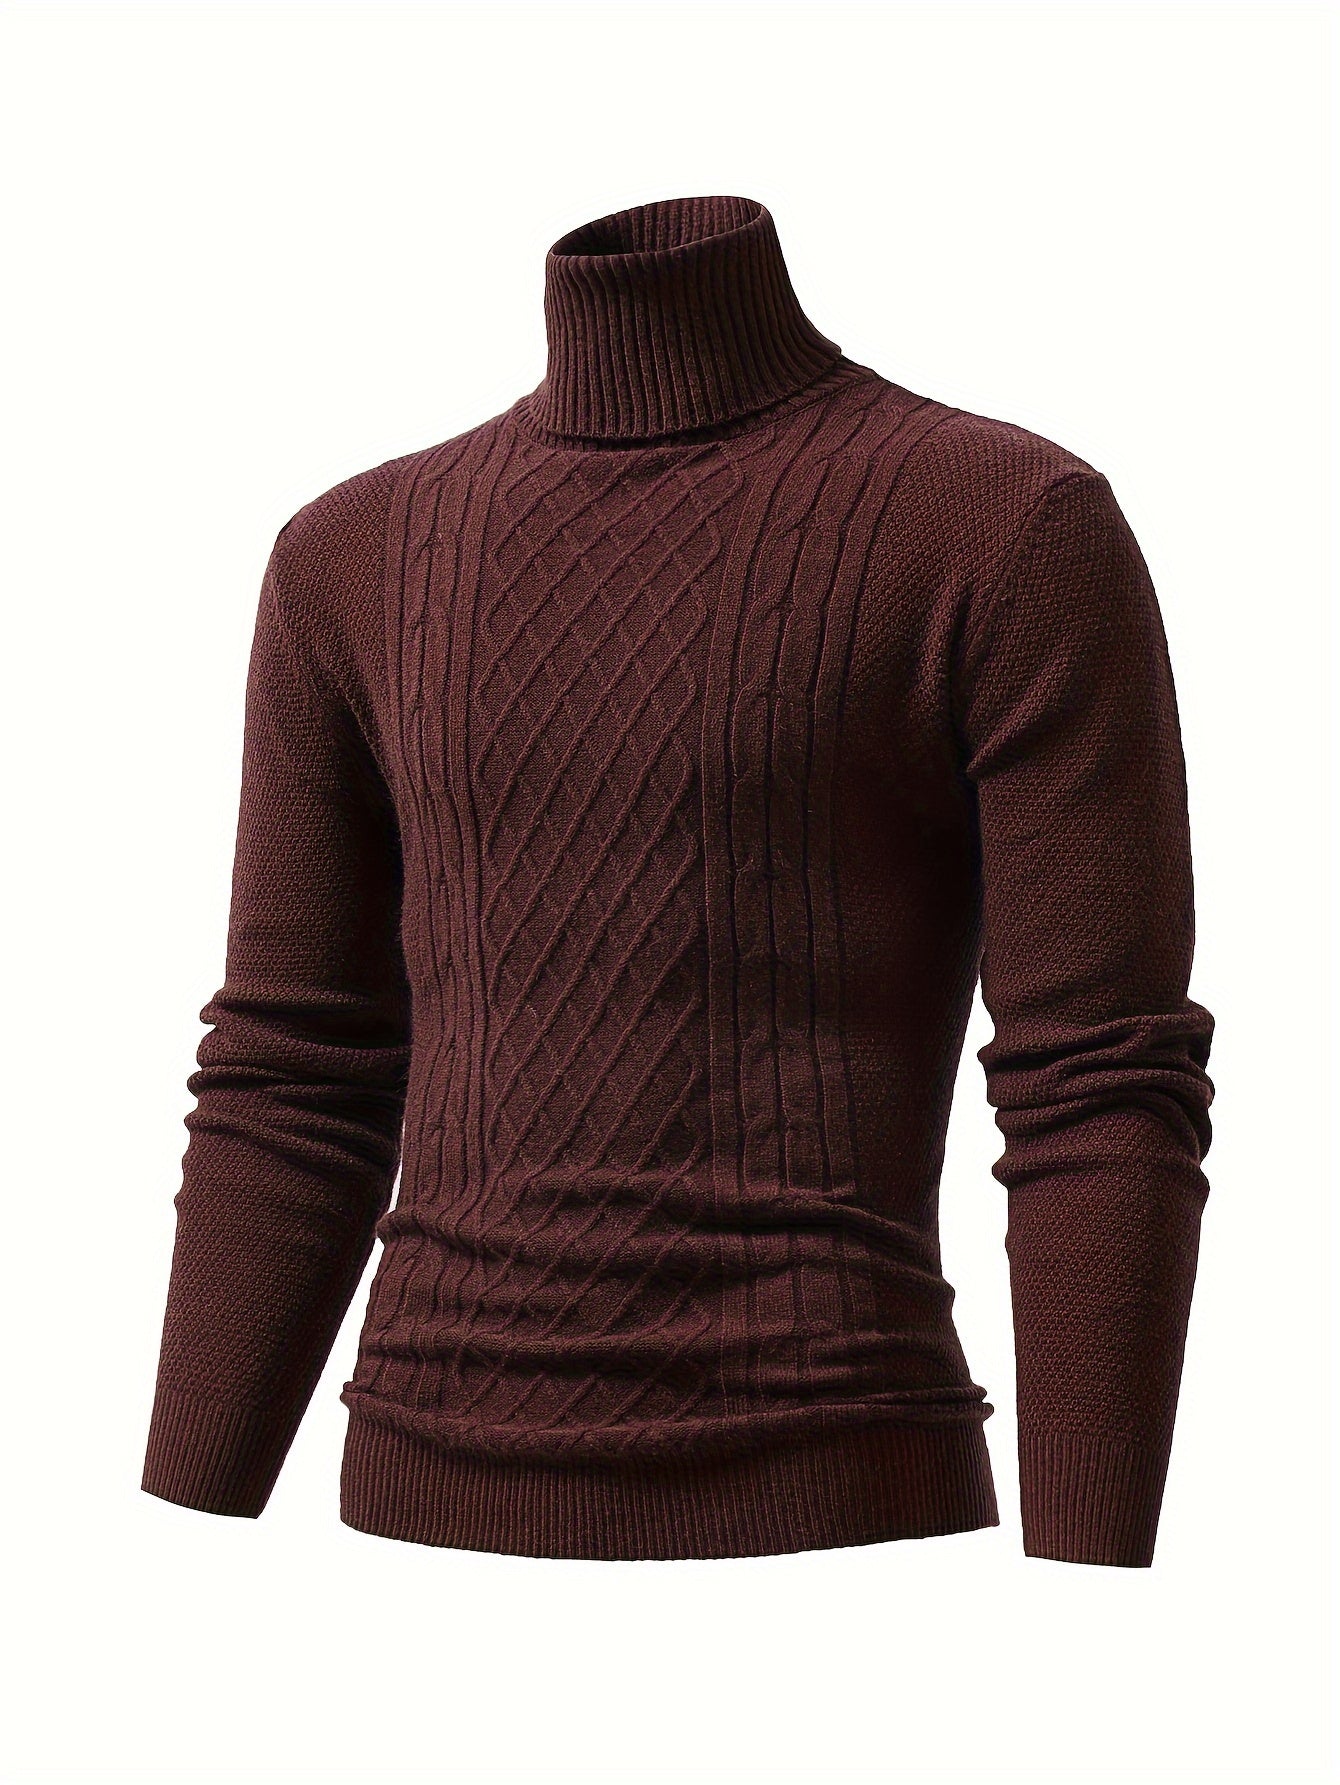 Foruwish - Turtle Neck Knitted Cable Sweater, Men's Casual Warm Solid High Stretch Pullover Sweater For Fall Winter